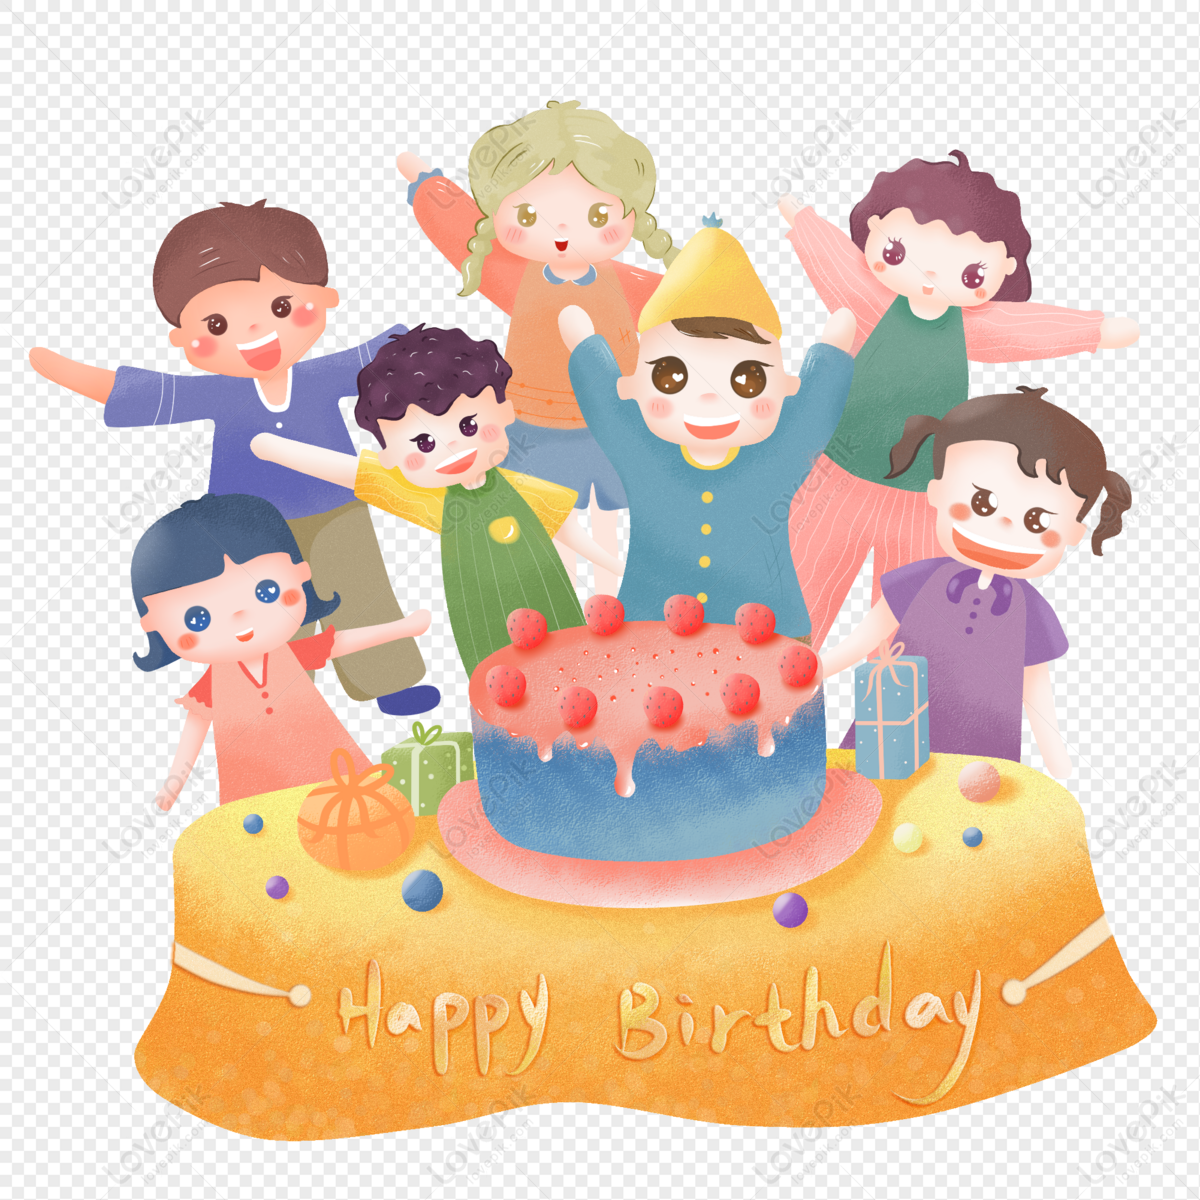 Cartoon Hand Painted Birthday Cake Png Material PNG Hd Transparent Image  And Clipart Image For Free Download - Lovepik | 401104894